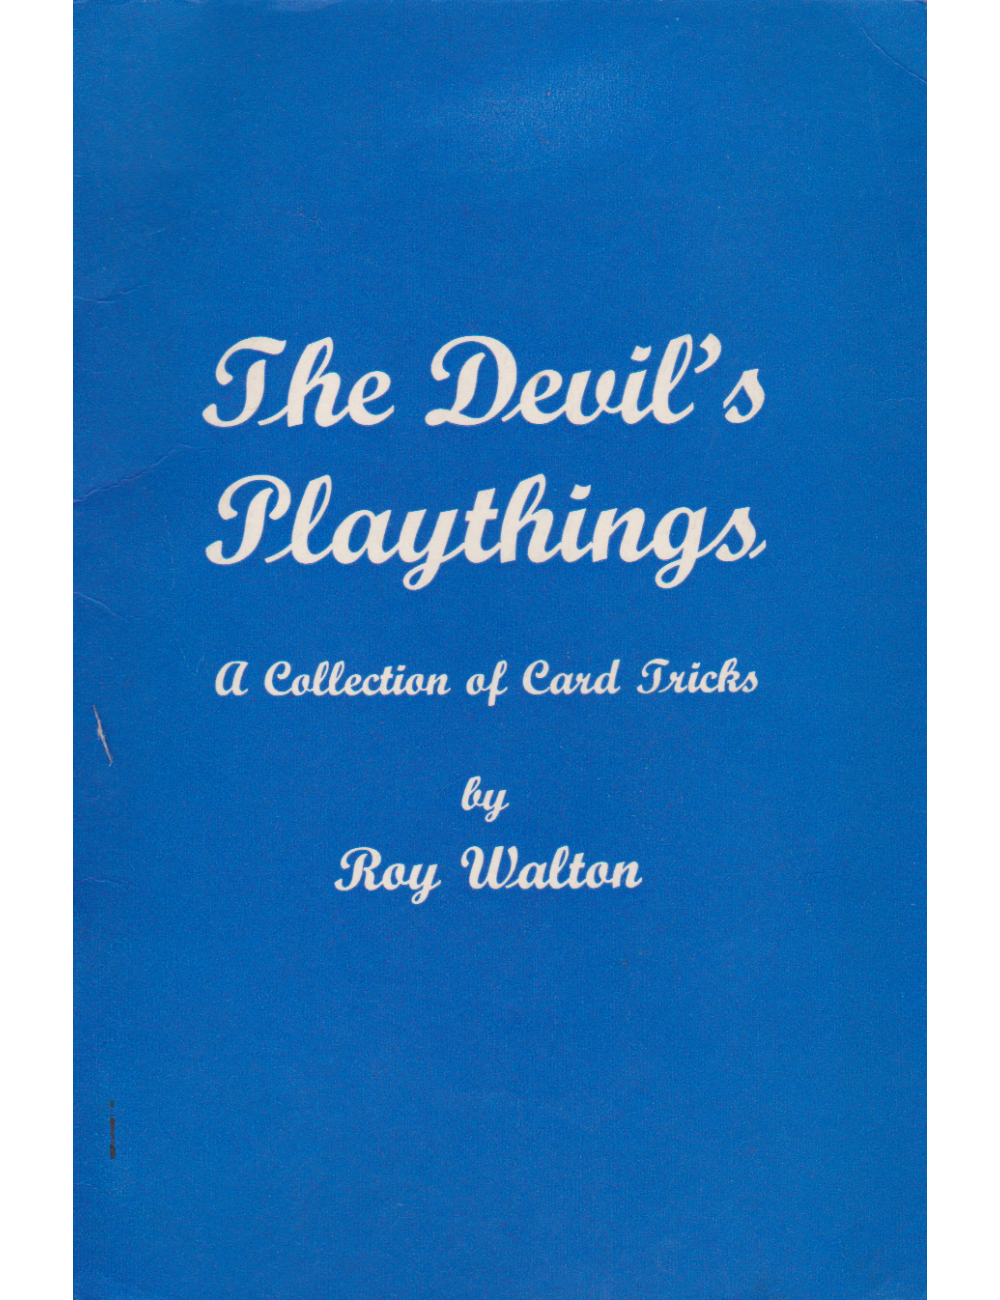 The Devil's Playthings, a Collection of Card Tricks by Roy Walton